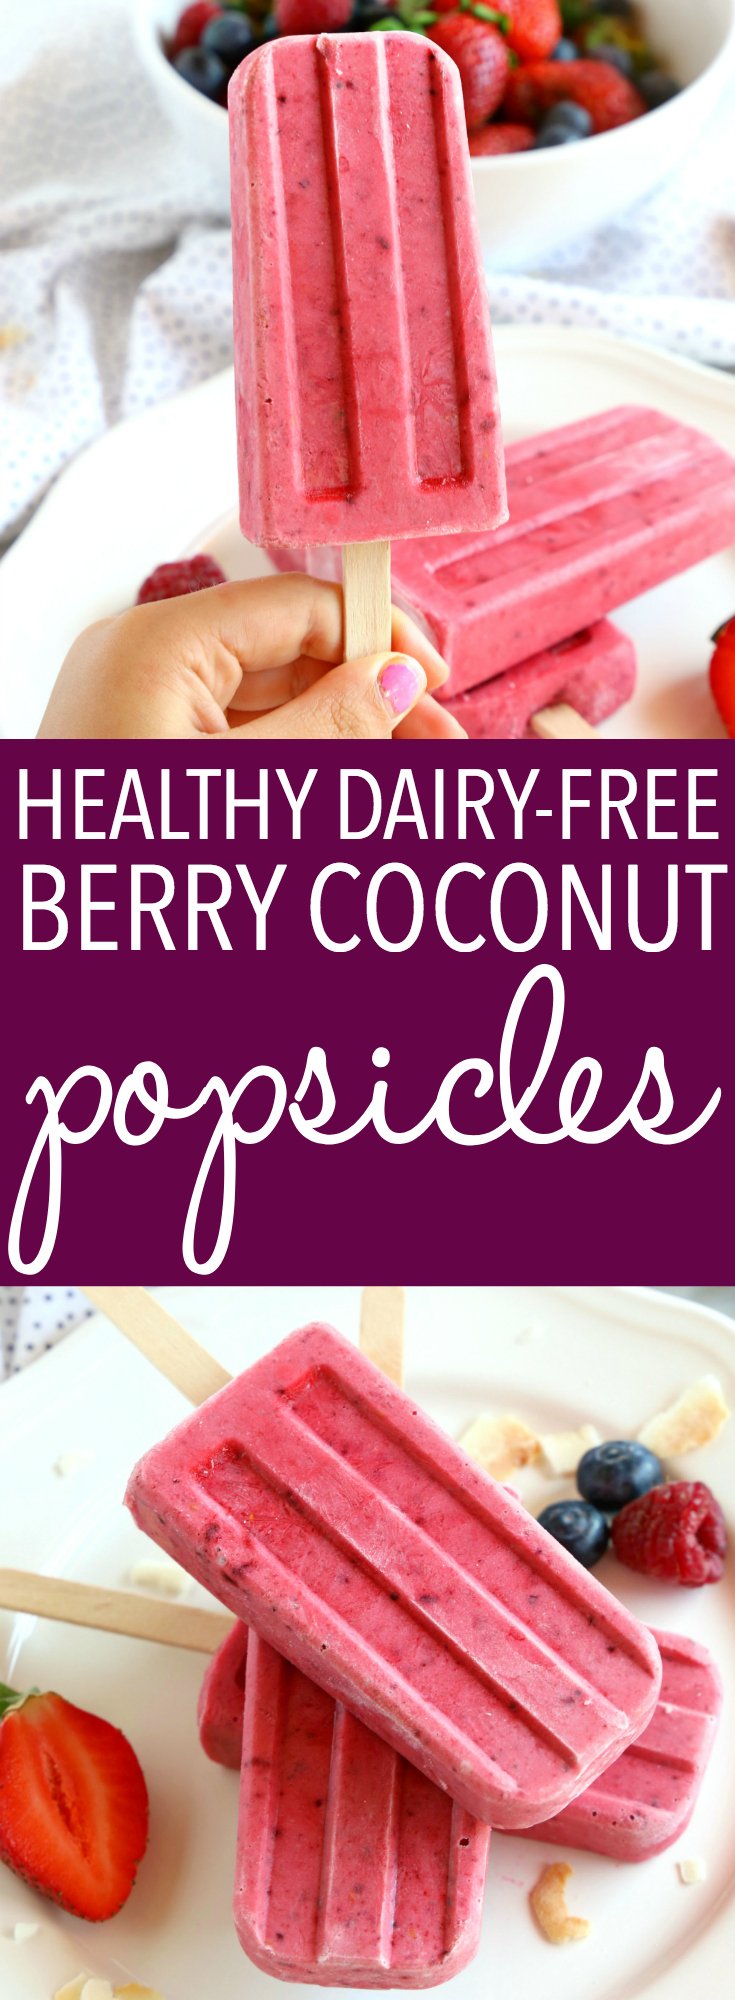 These Healthy Berry Coconut Popsicles are the perfect dairy-free and vegan treat for summer! They're ultra-healthy, kid-friendly and SO delicious!! Recipe from thebusybaker.ca! #veganpopsicles #veganicepops #healthyicepops #healthysummertreat #healthykidsnack #healthysnackforkids #summerrecipeforkids #healthyicecream #icecreamtreathomemade via @busybakerblog